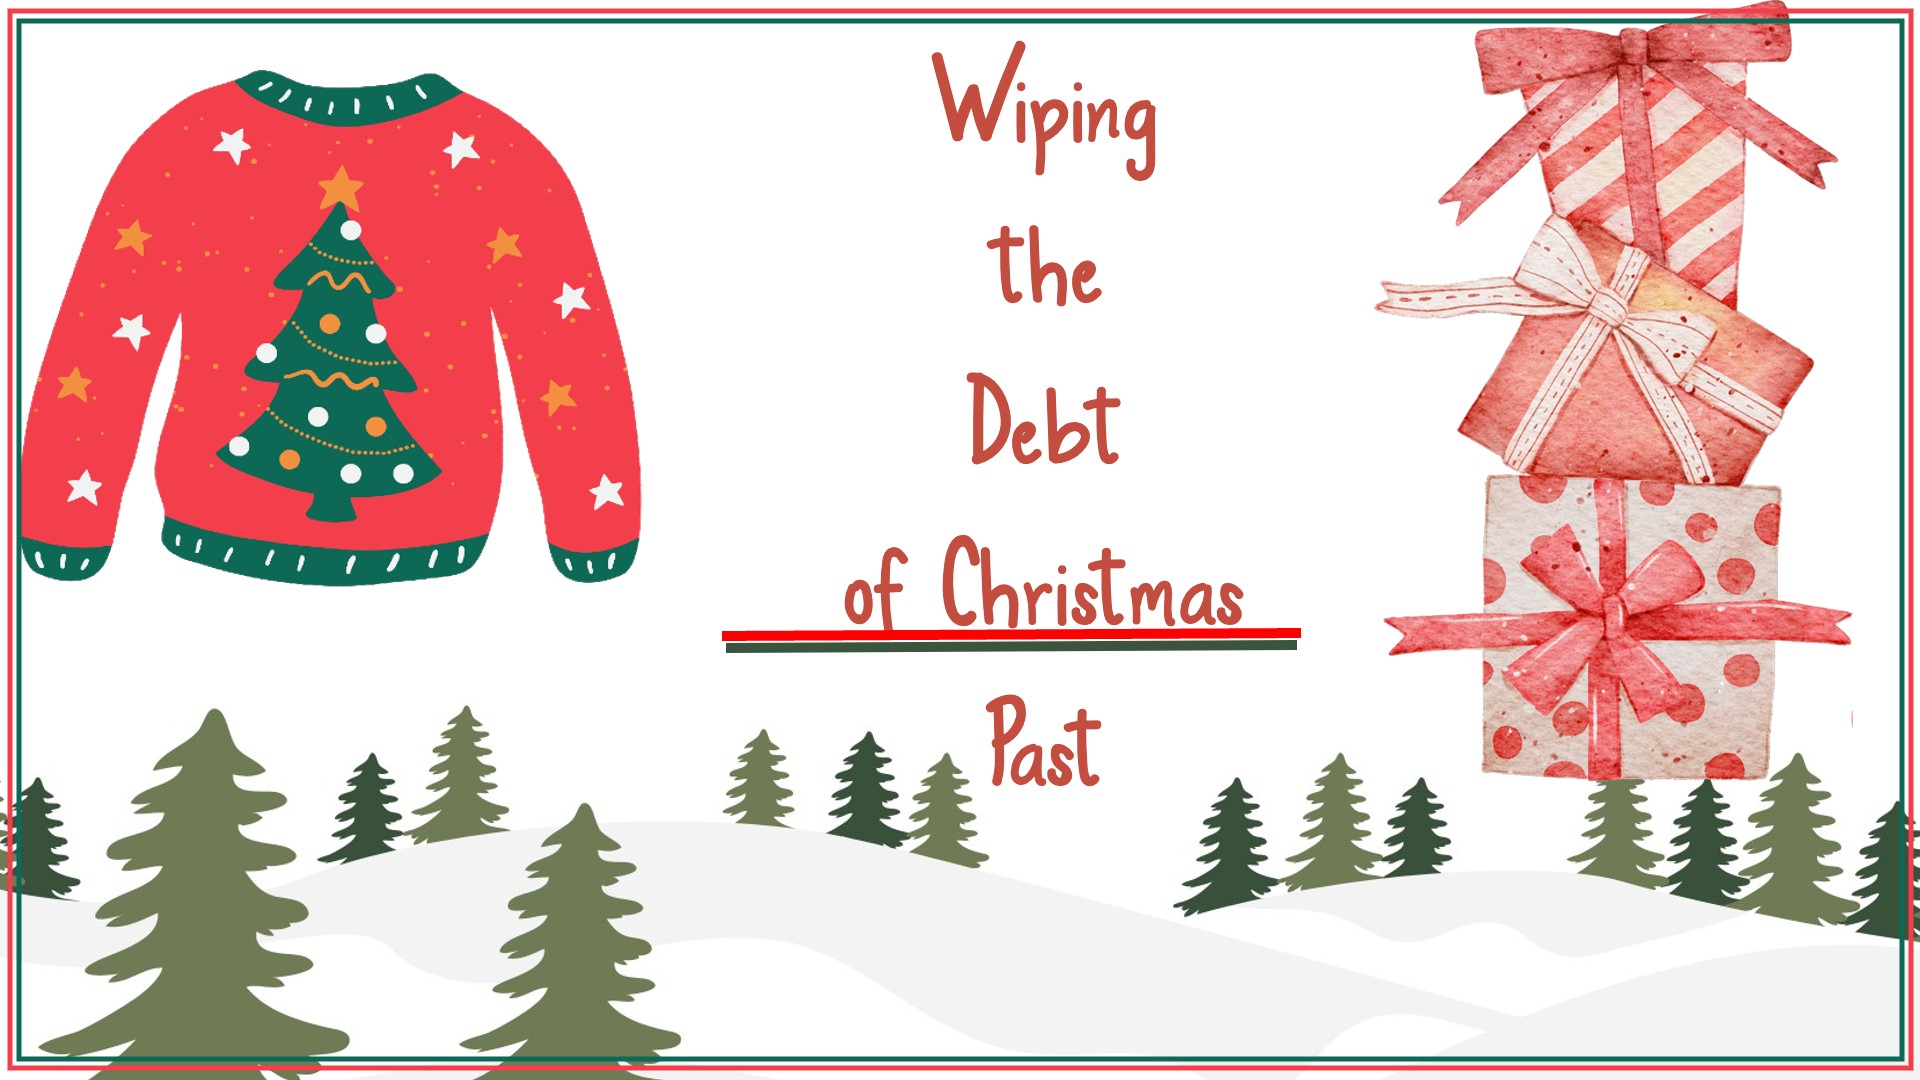 Wiping the Debt of Christmas Past